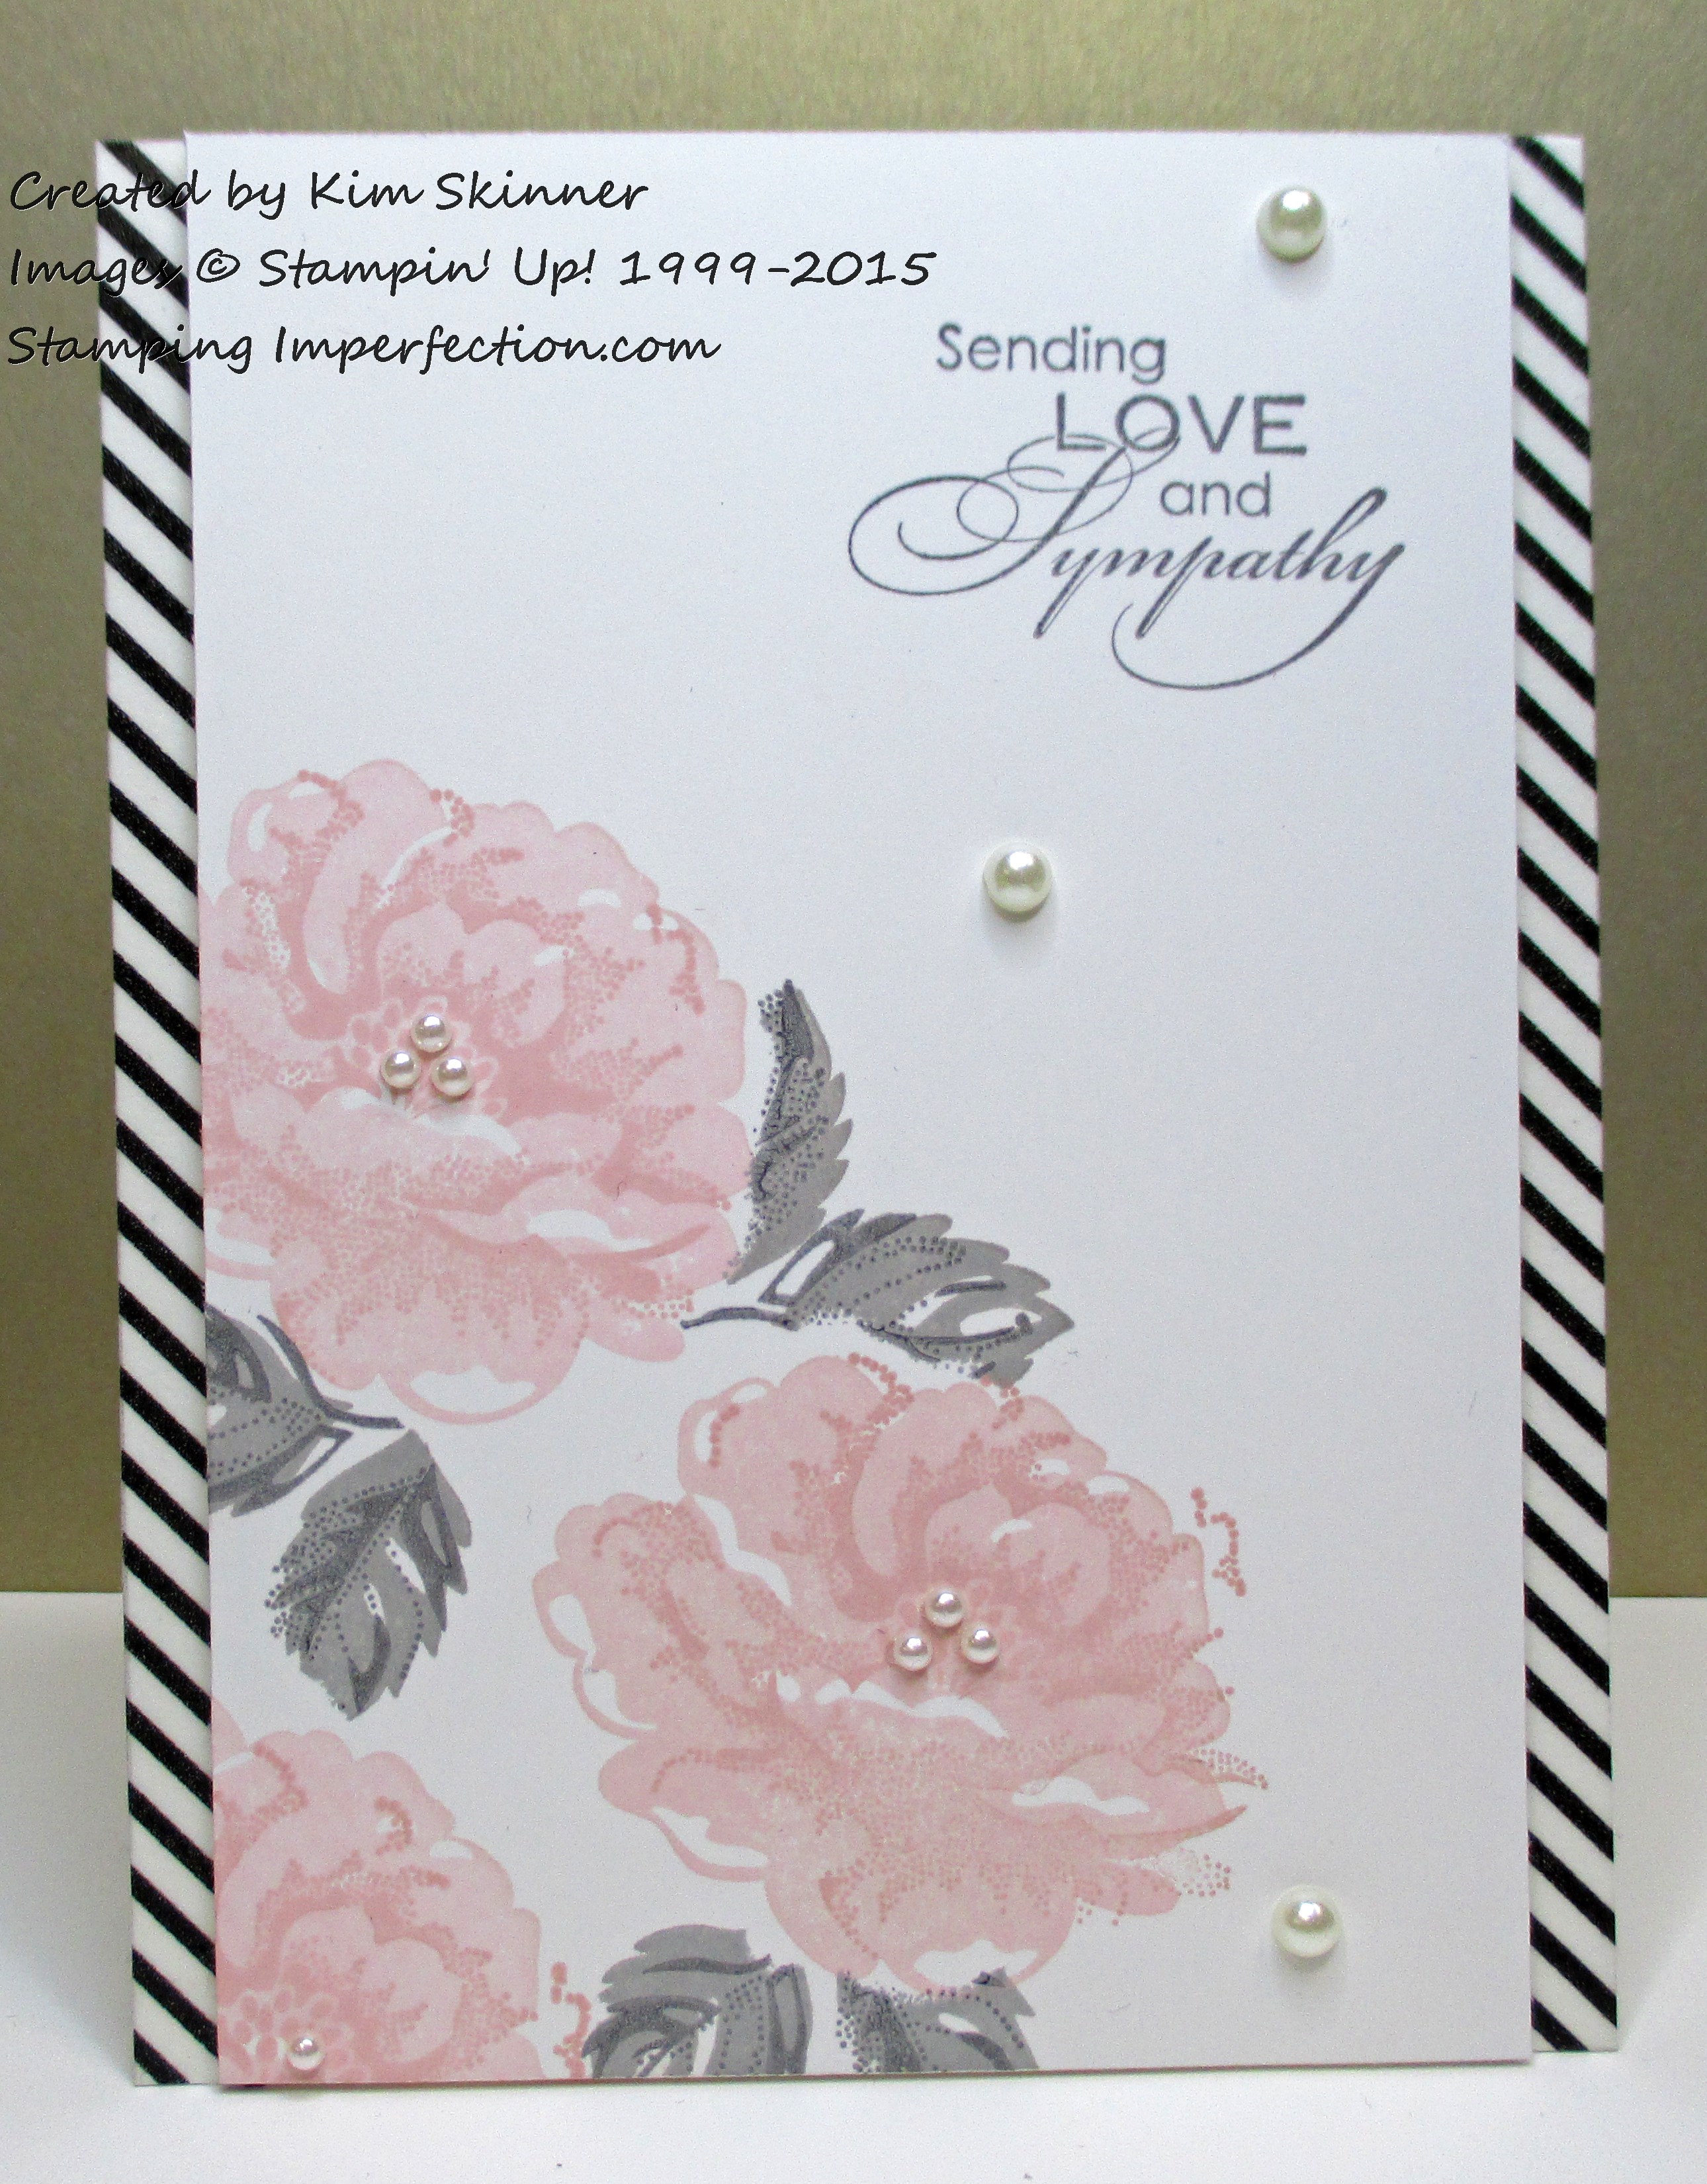 Sending Condolences with a pretty card from Stamping Imperfection